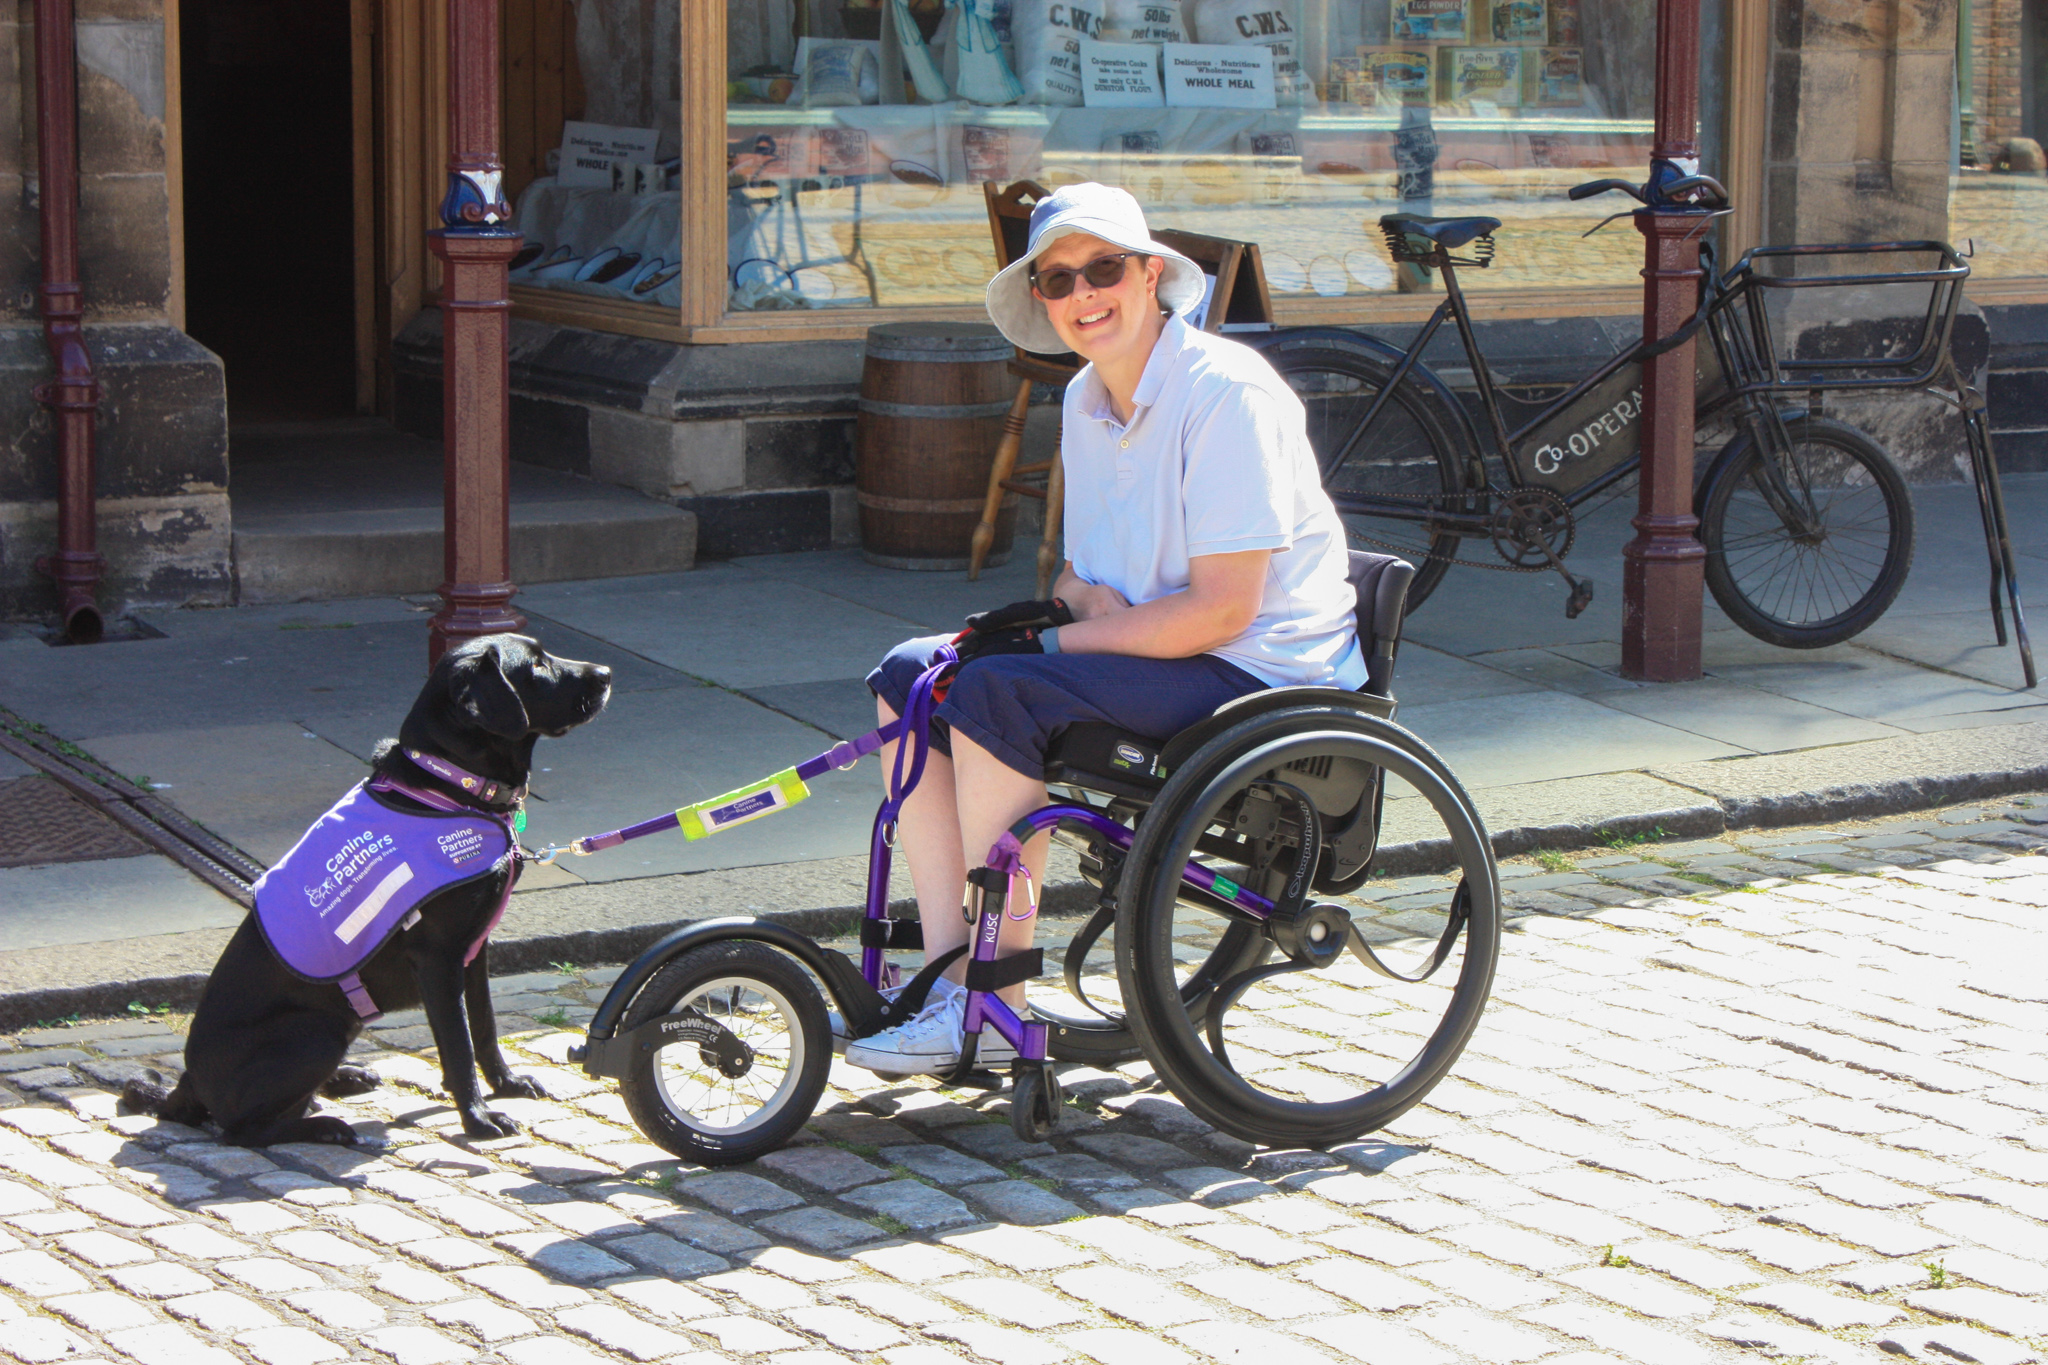 Nicki in a manual wheelchair with additional big front wheel attachment. Canine Partner Liggy is sitting in front of her on a cobbled street.